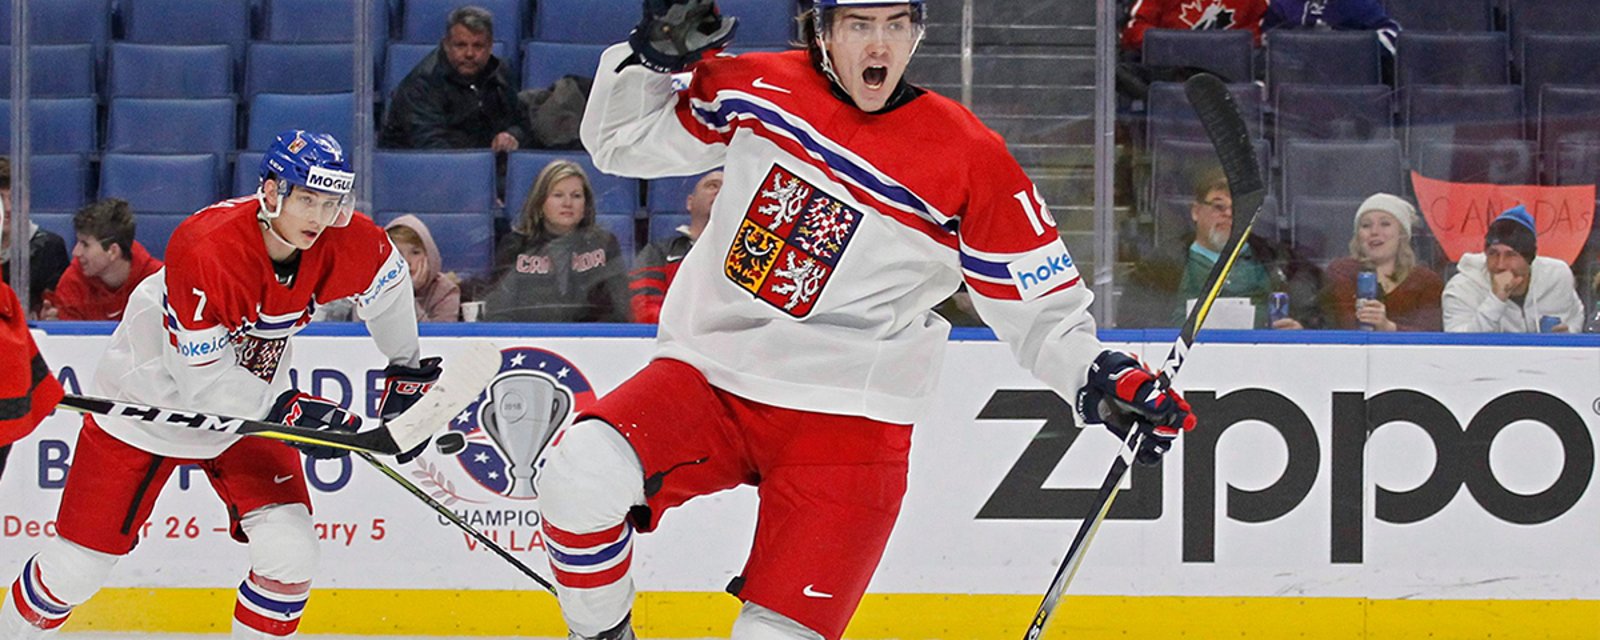 Breaking: Red Wings release Zadina for World Juniors